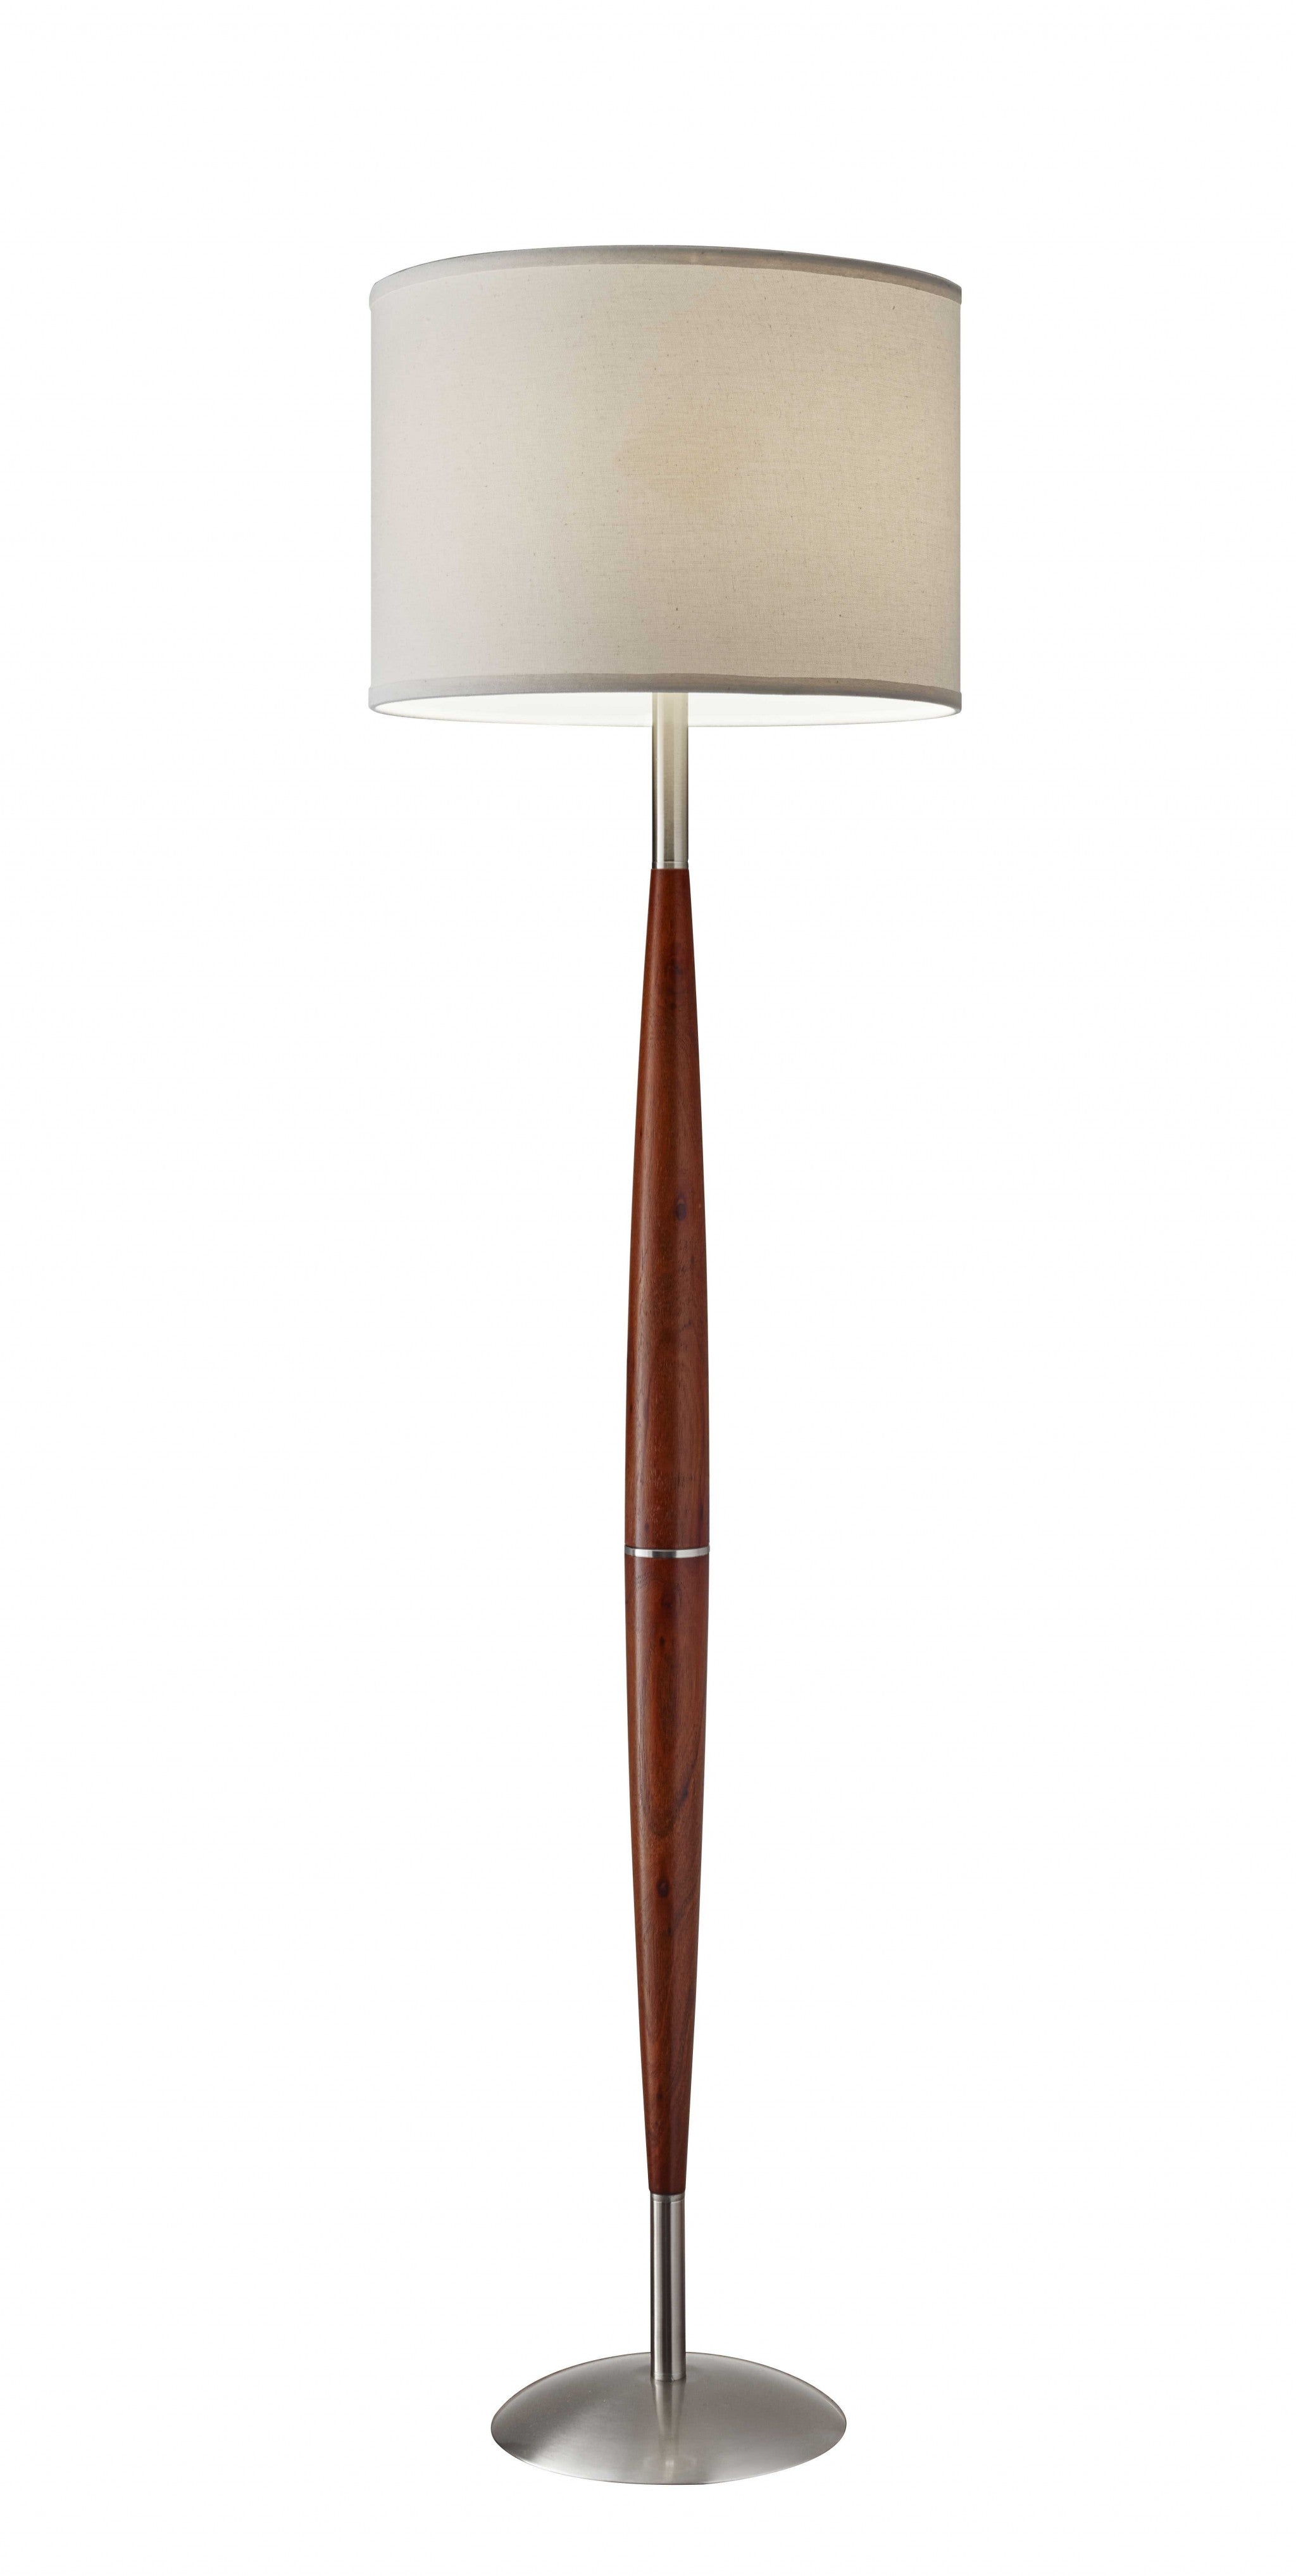 61" Solid Wood Traditional Shaped Floor Lamp With White Drum Shade